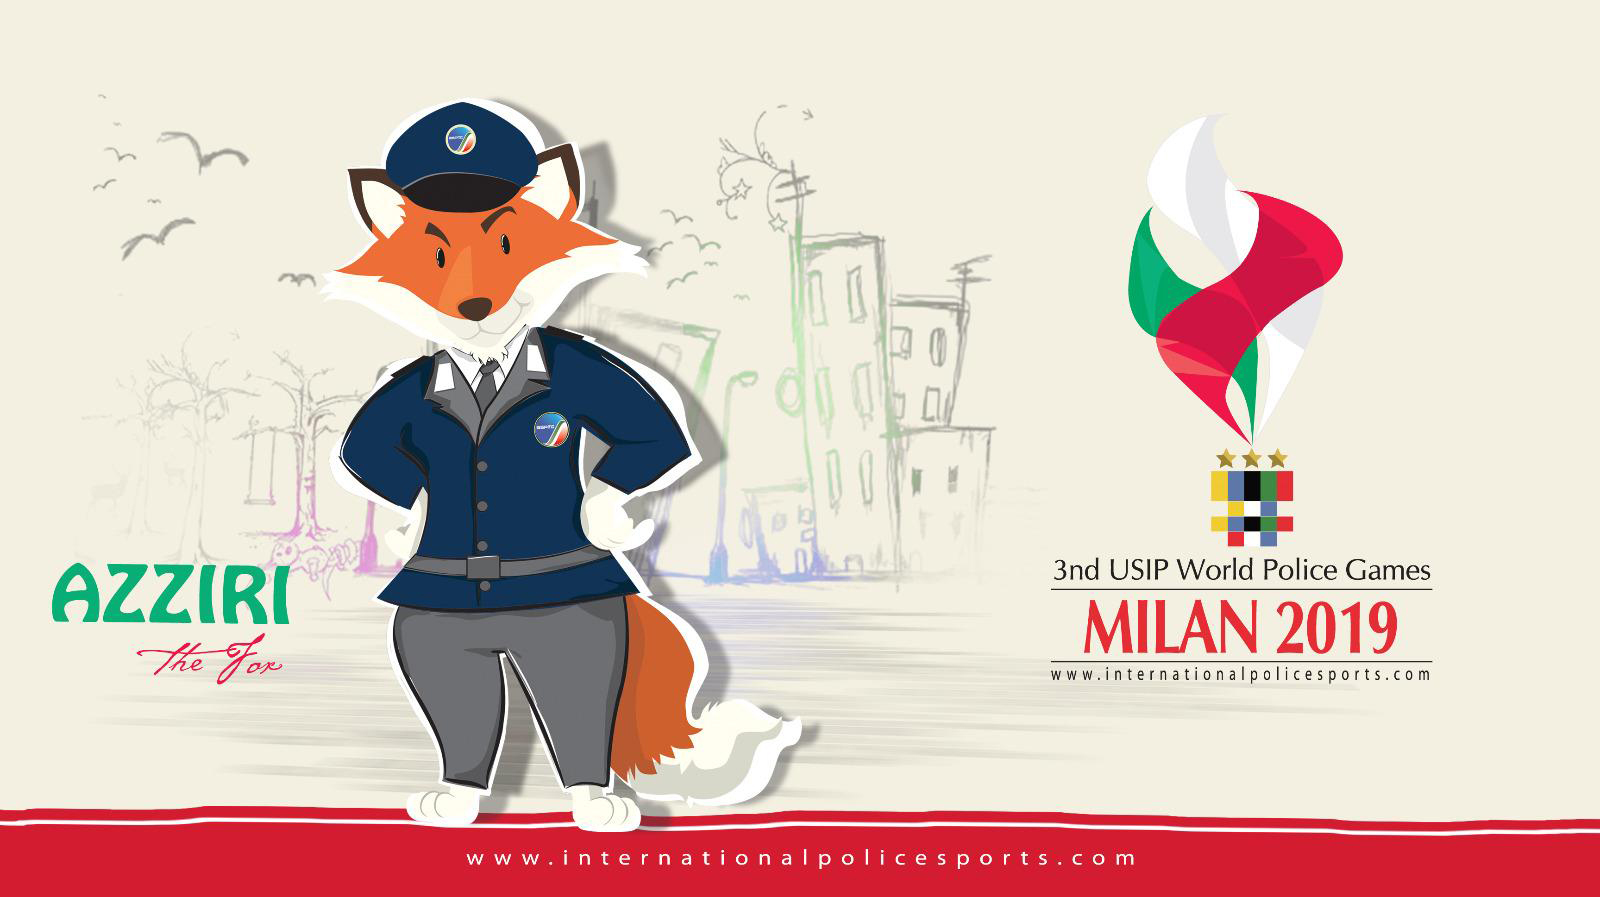 3nd-USIP-World-Police-Games-Milan-2019-featured